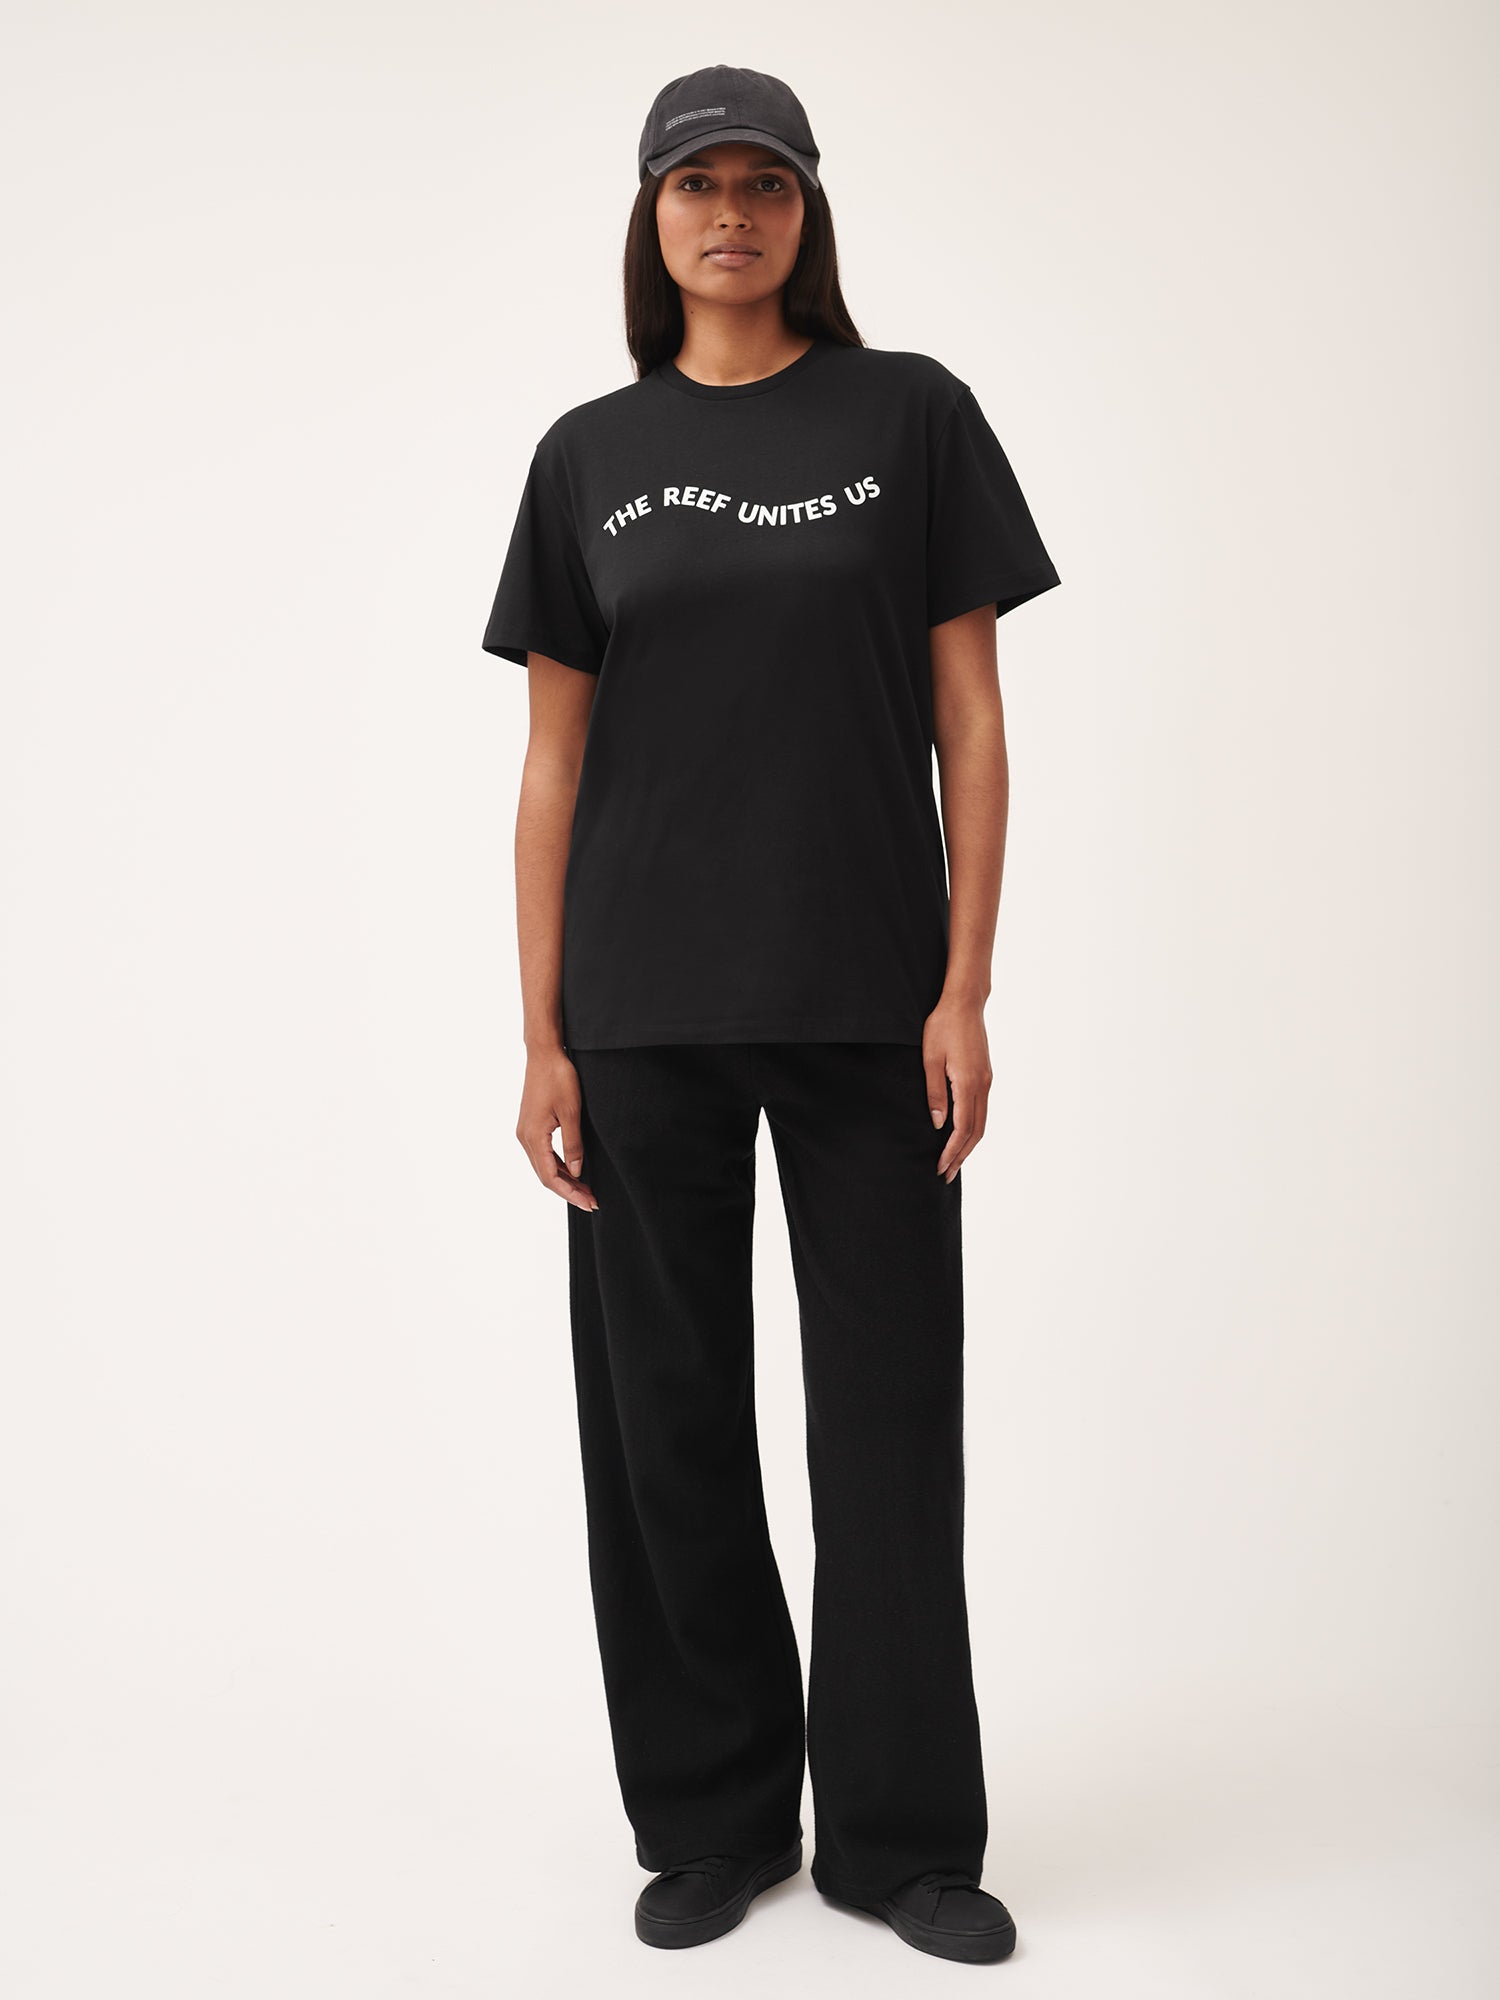 Coral_Gardeners_Midweight_T-Shirt_Black_female-3